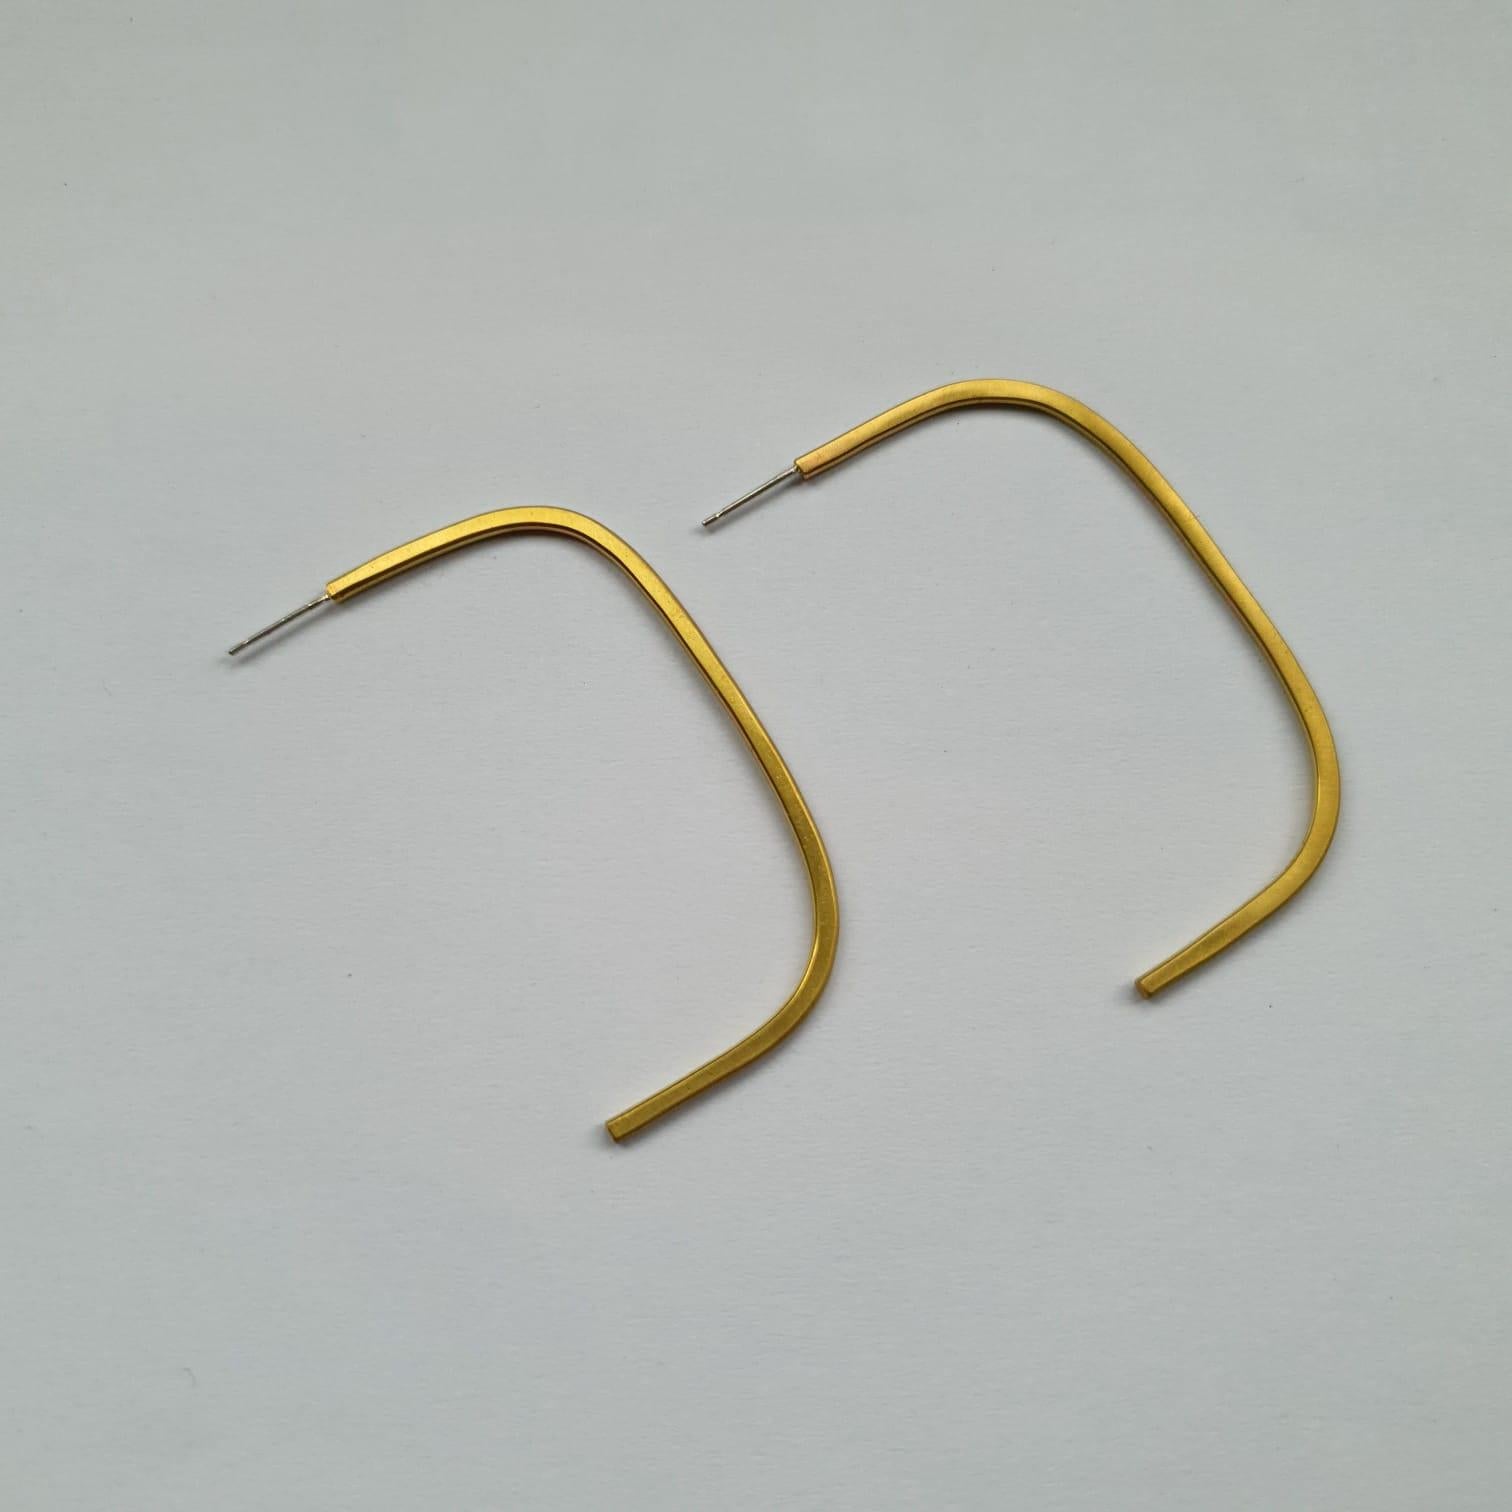 Elegant stud earrings made from forged brass wire, formed into a half folded square. 

The polished inside surface catches the light when worn. 

They are secured to the ear with a classic butterfly back, and are a comfortable weight for everyday